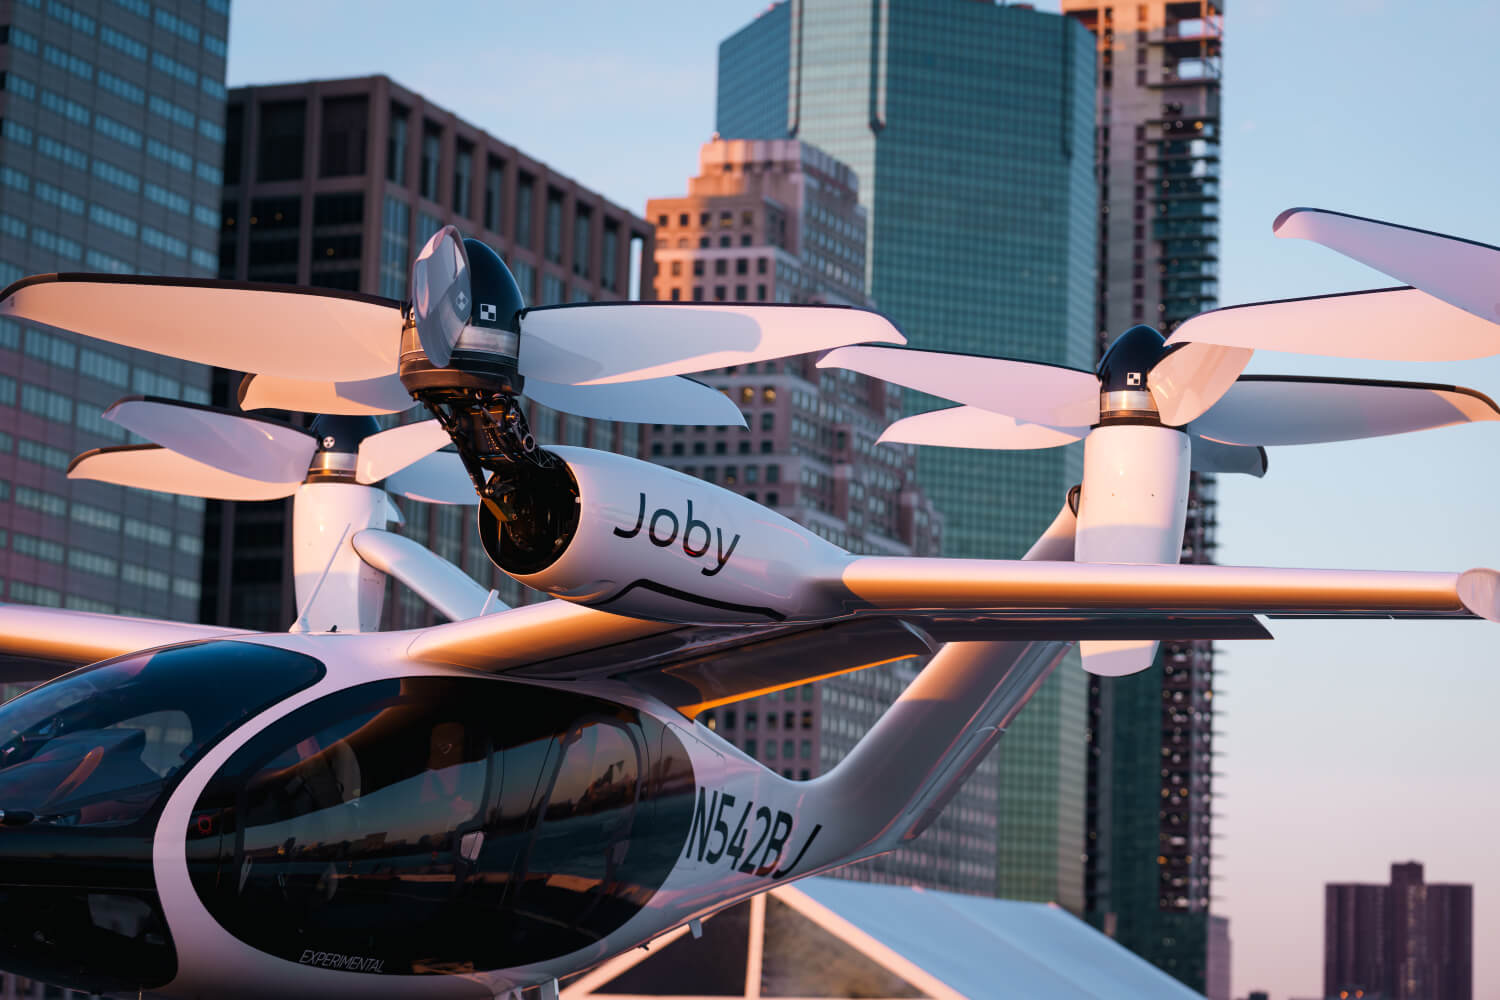 Joby shares eVTOL air taxi rollout plans